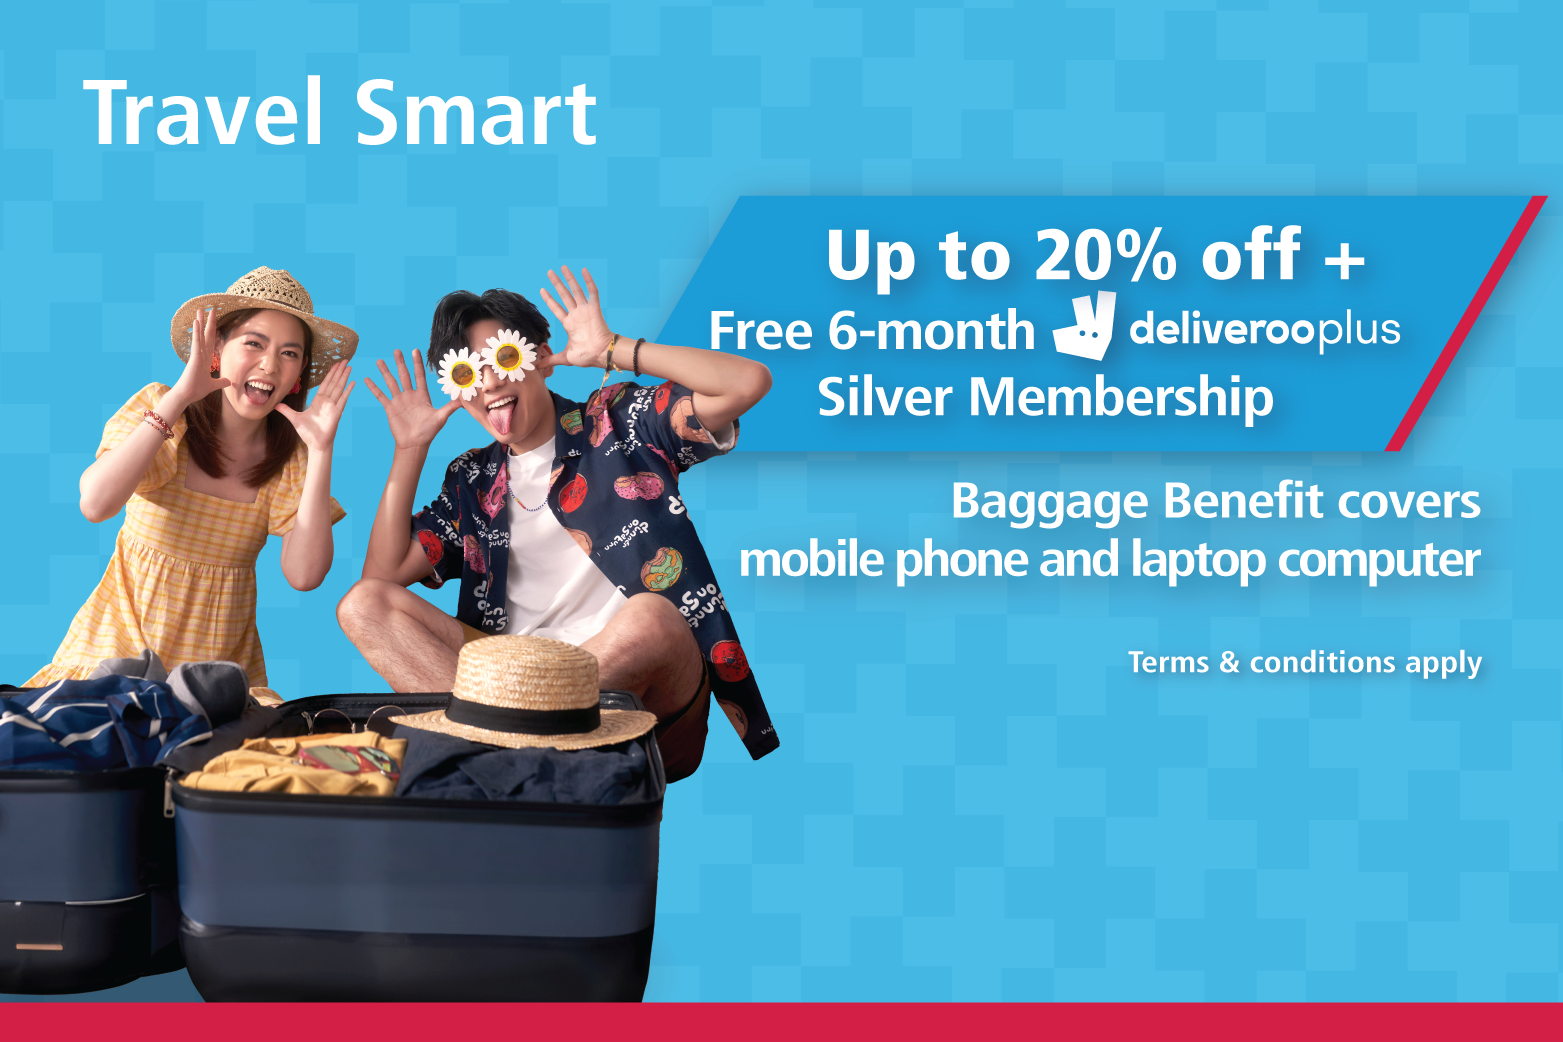 Baggage Benefit covers mobile and laptop